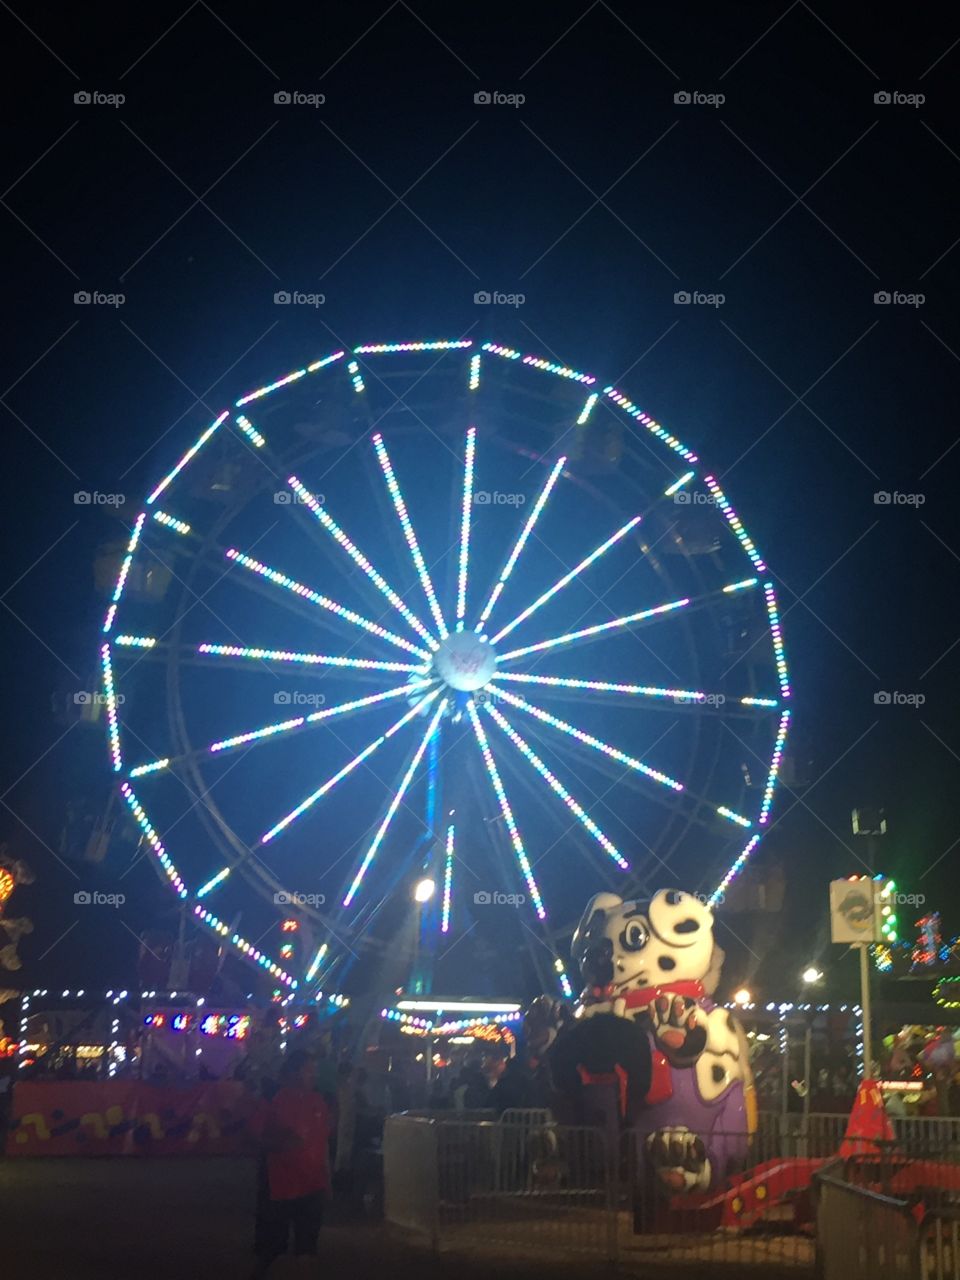 A night at the county fair